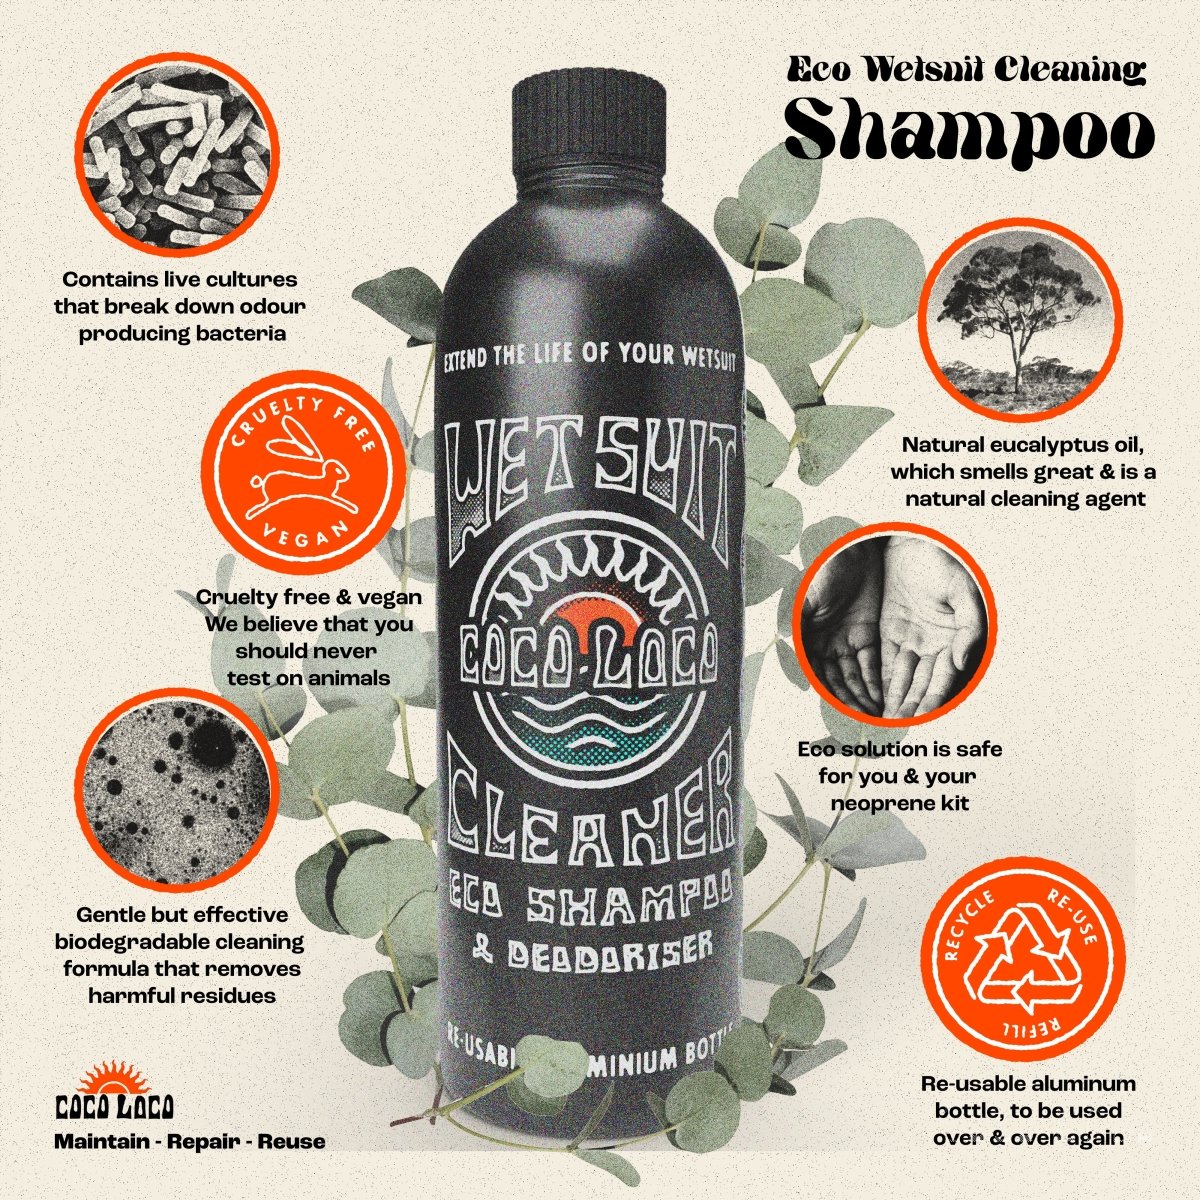 wco wetsuit cleaner shampoo whats in the bottle - coco loco